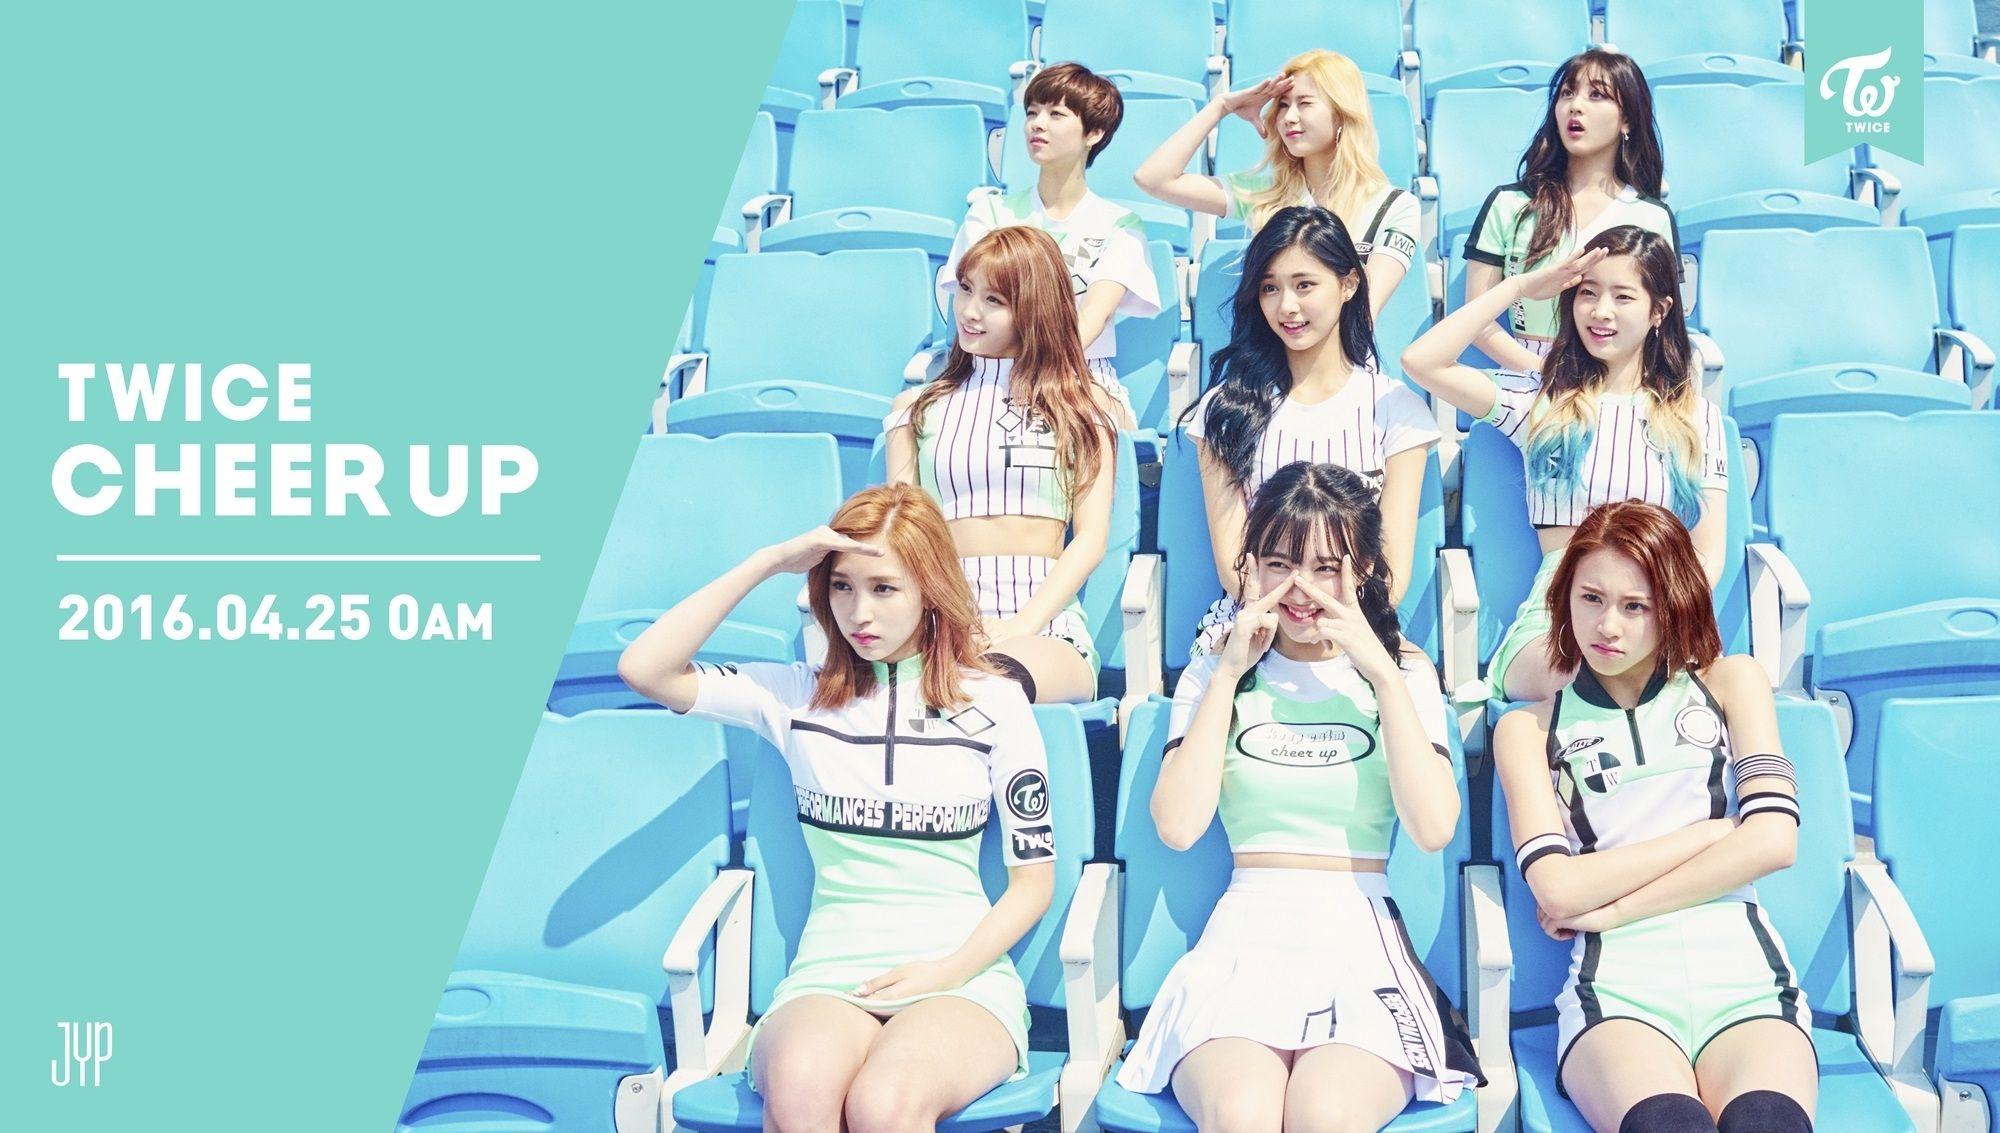 Most Popular Twice Cheer Up Wallpaper FULL HD 1080p For PC Desktop. Cheer up, Cheer, Twice